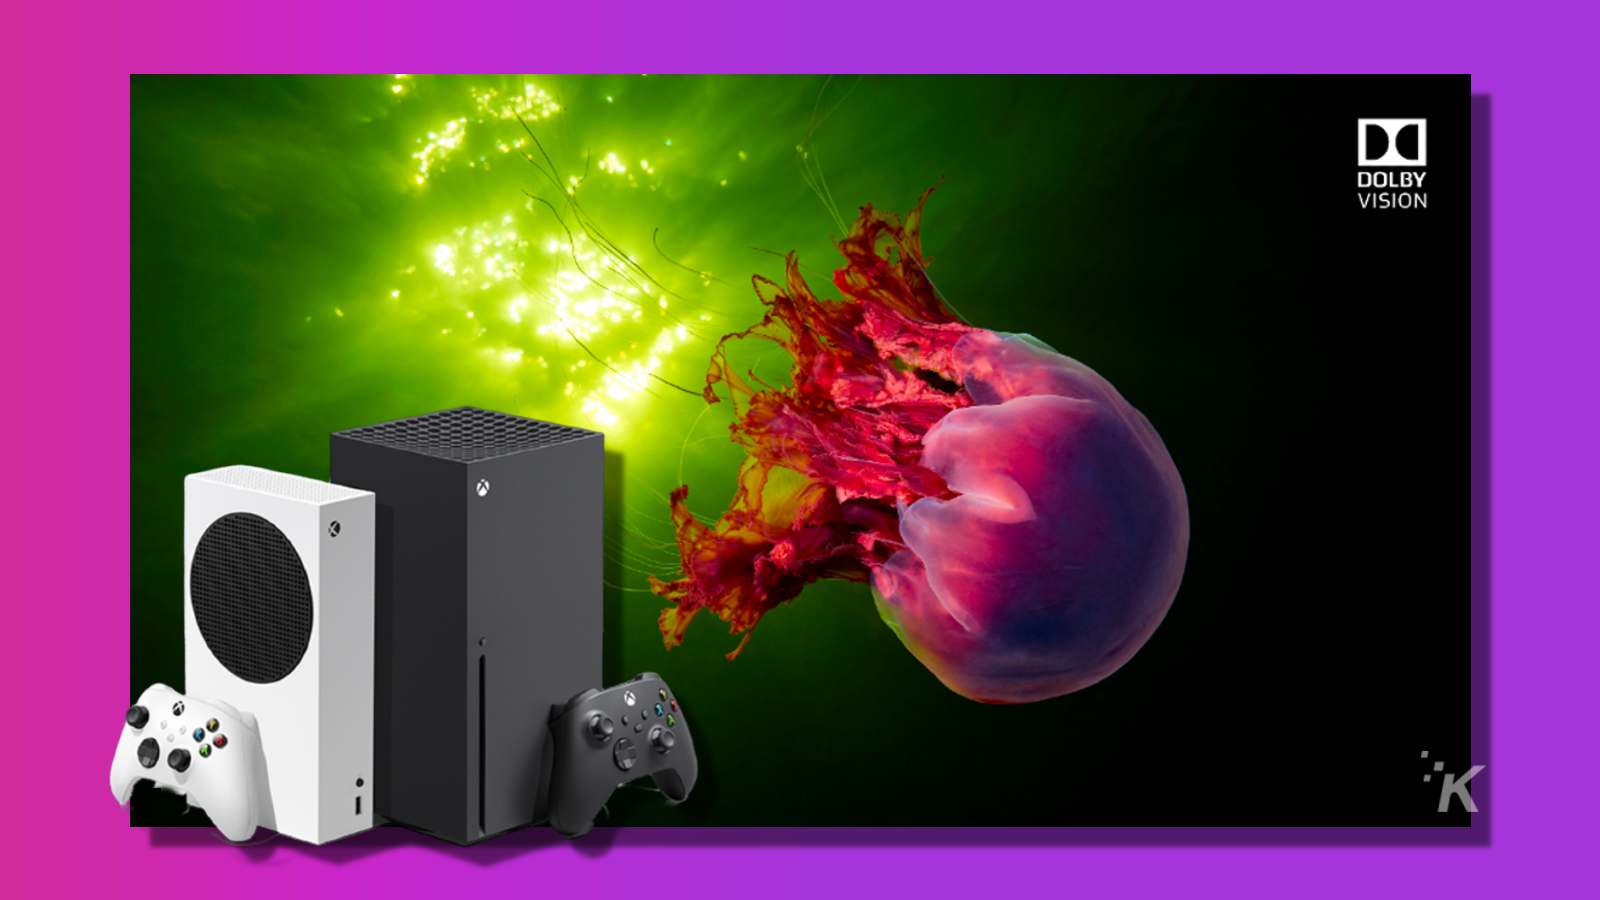 xbox series s x on a purple background with TV showing off Dolby Vision